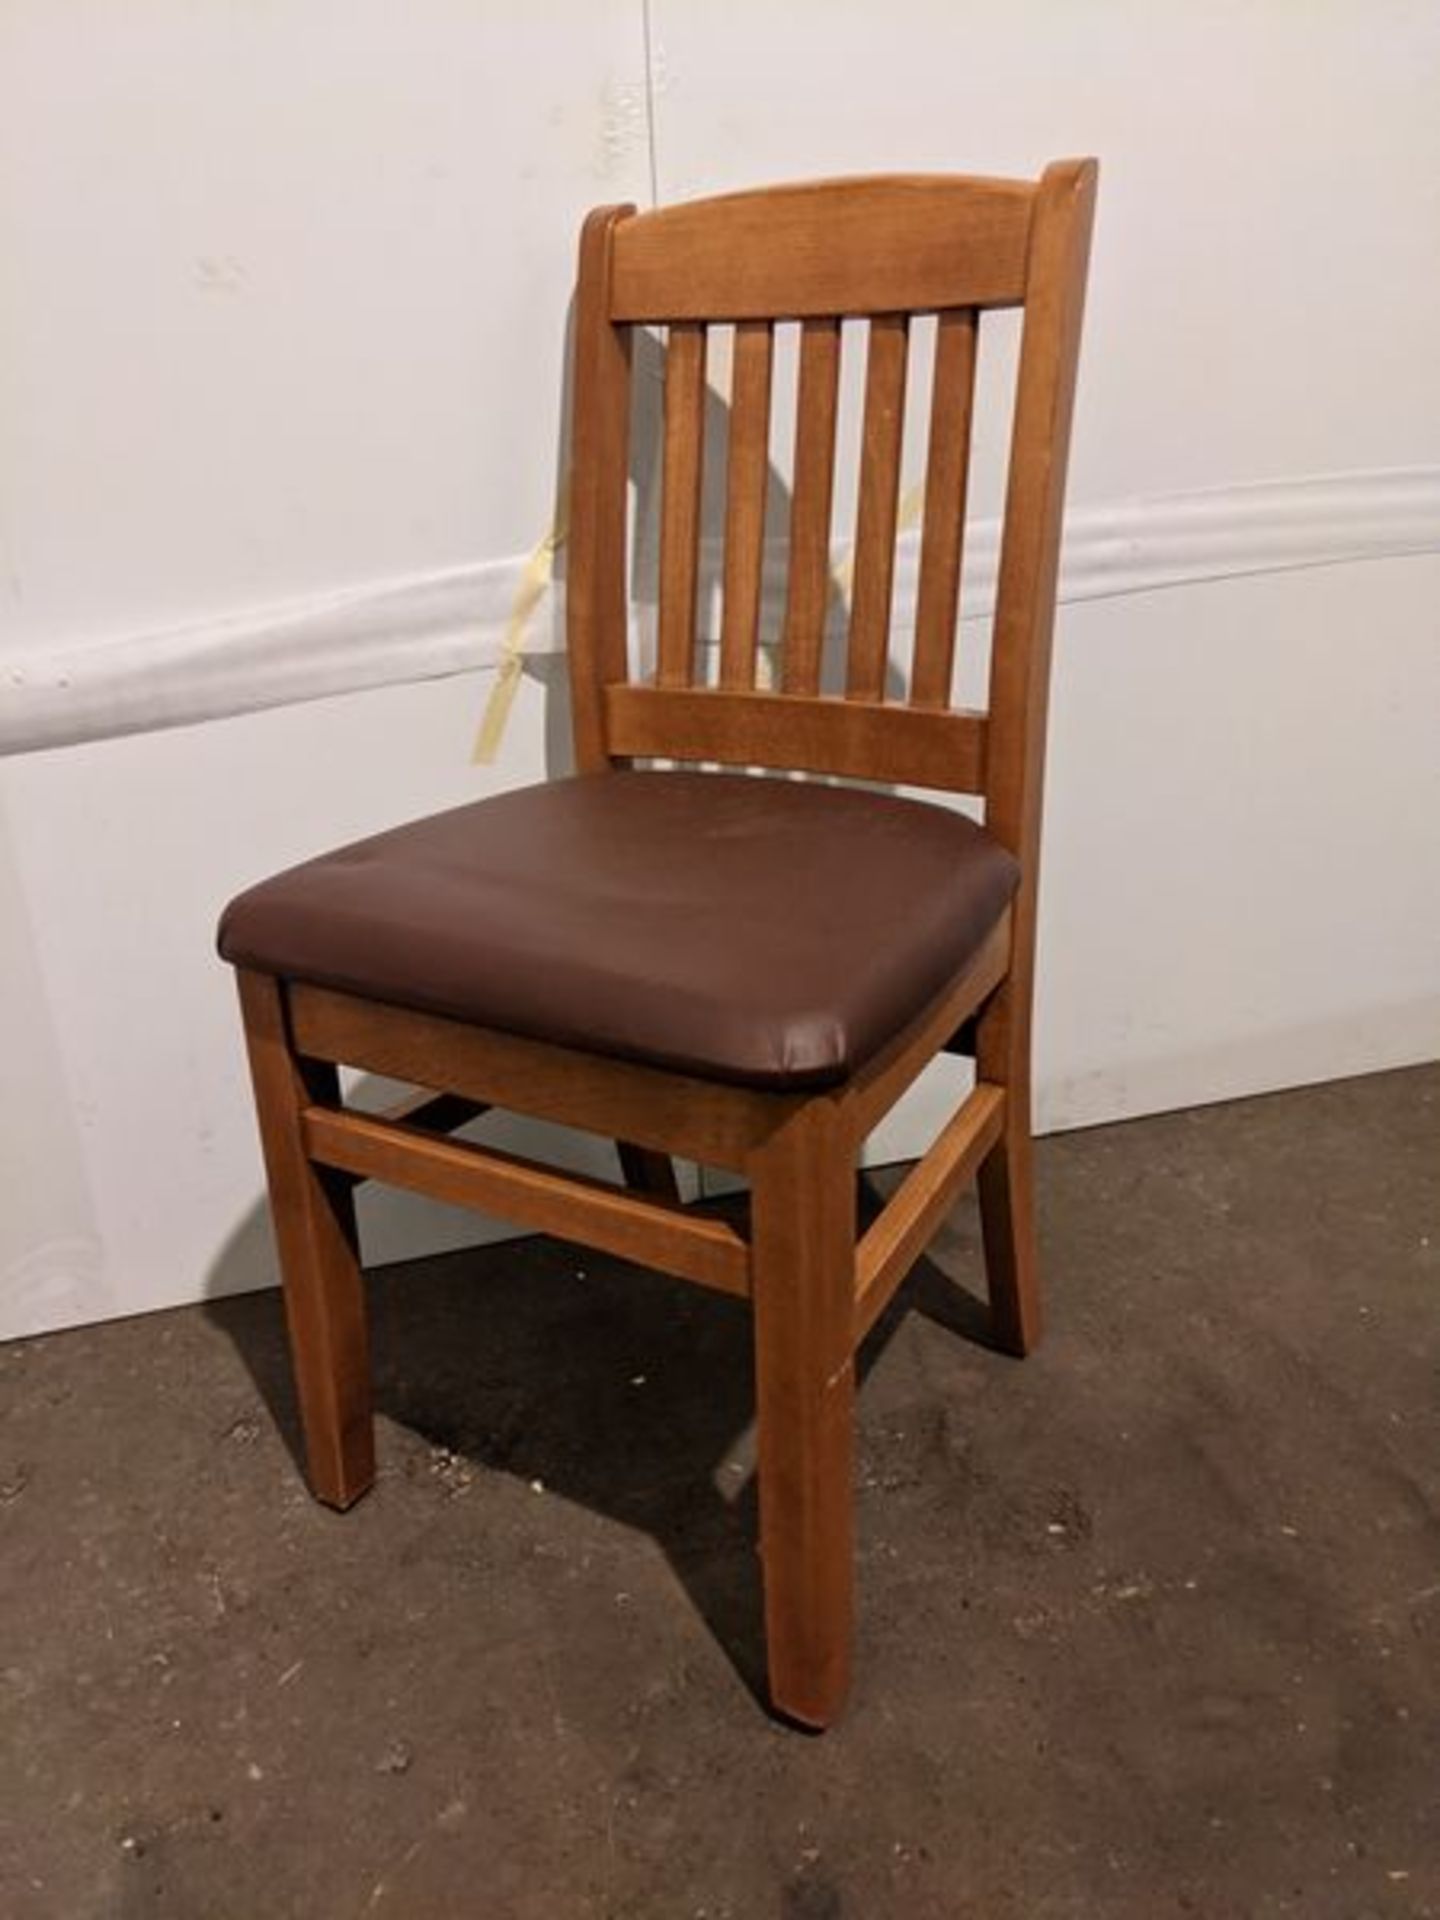 20 Bentwood Padded Dining Chairs - used only 4 months - 1 price for all